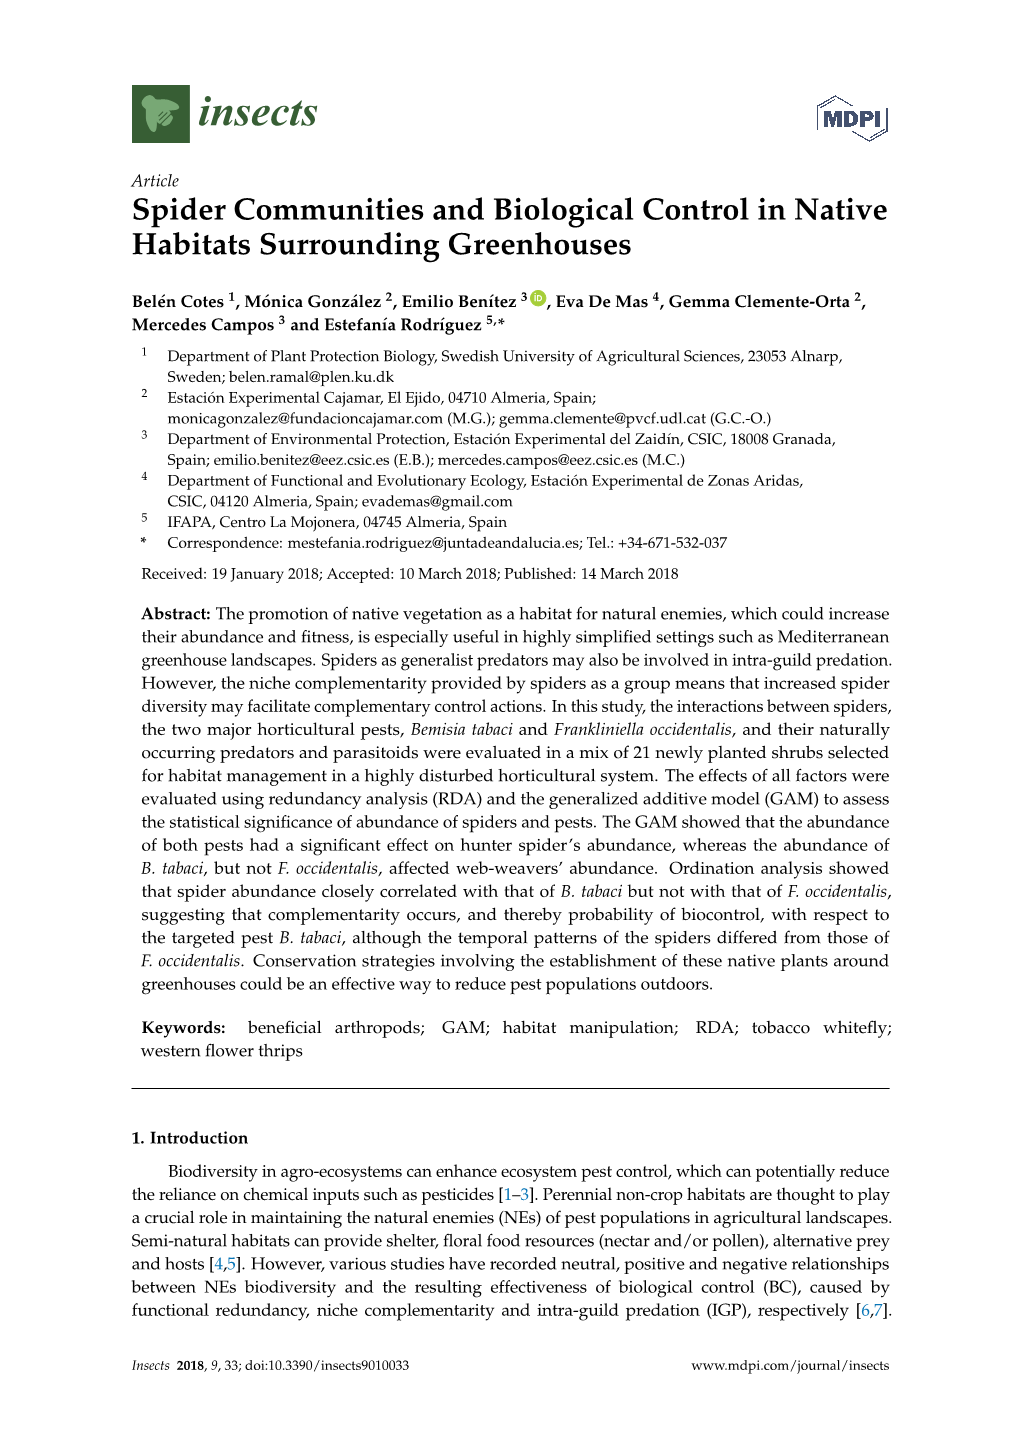 Spider Communities and Biological Control in Native Habitats Surrounding Greenhouses